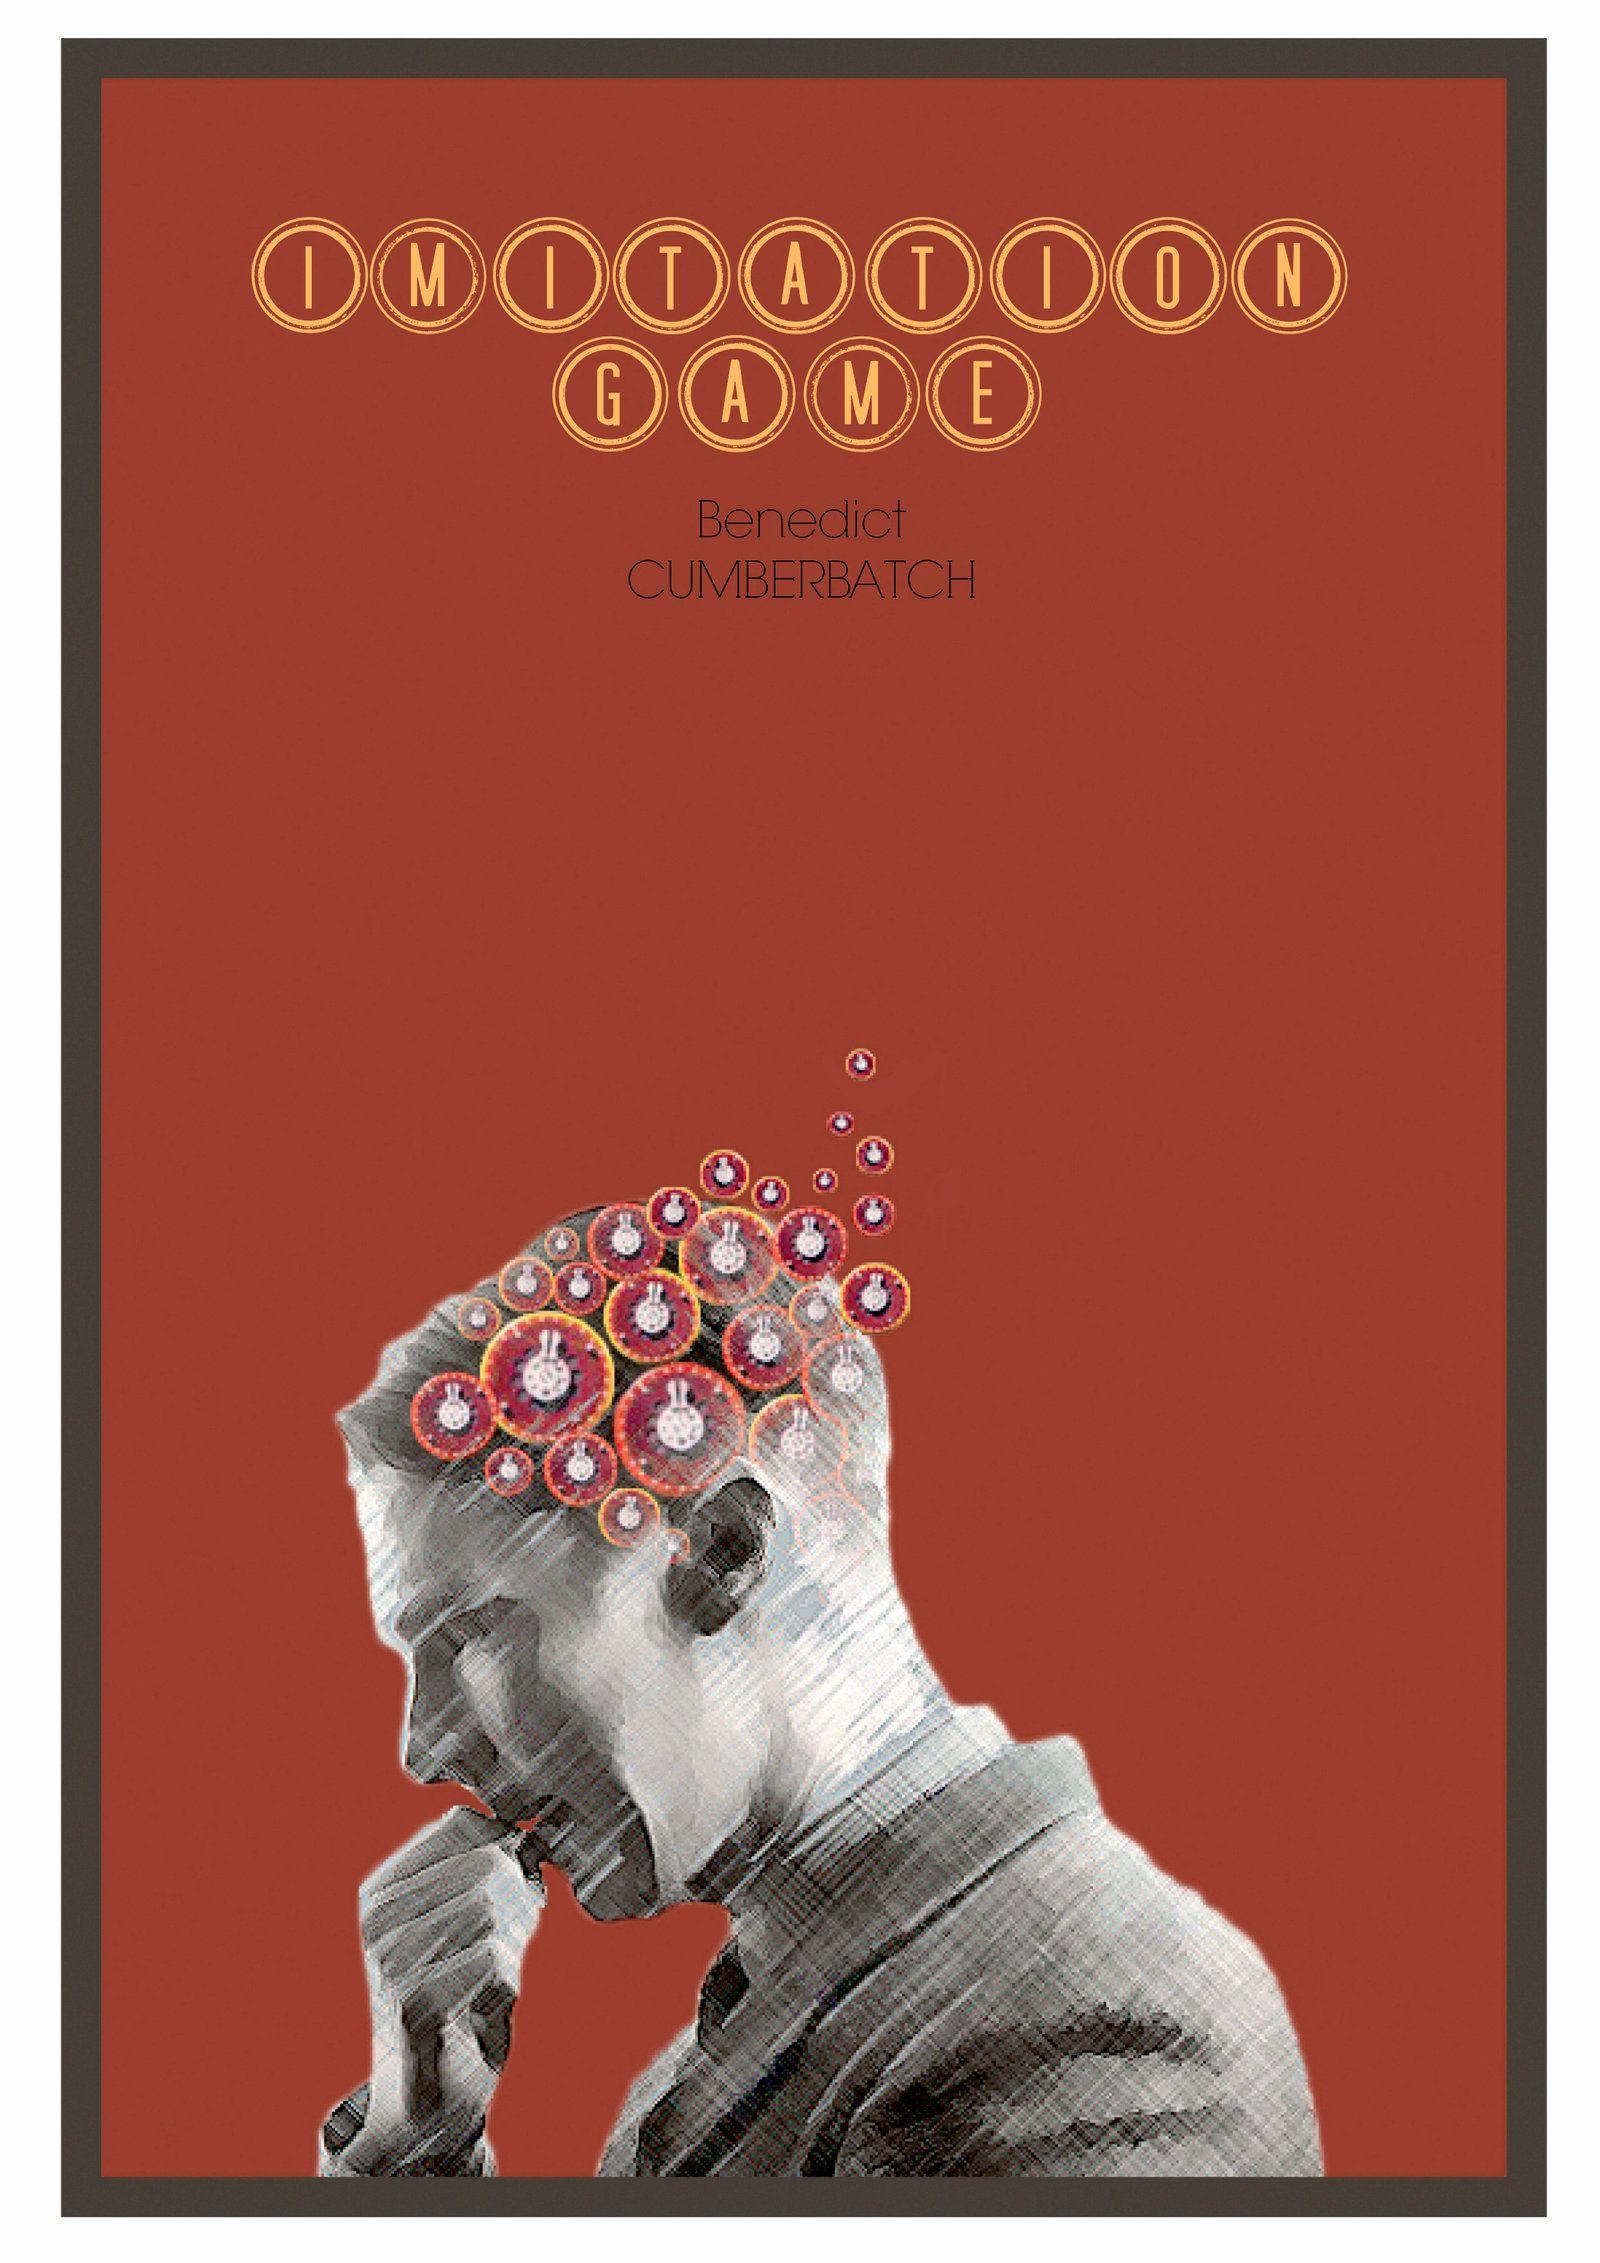 Imitation Game Poster by the